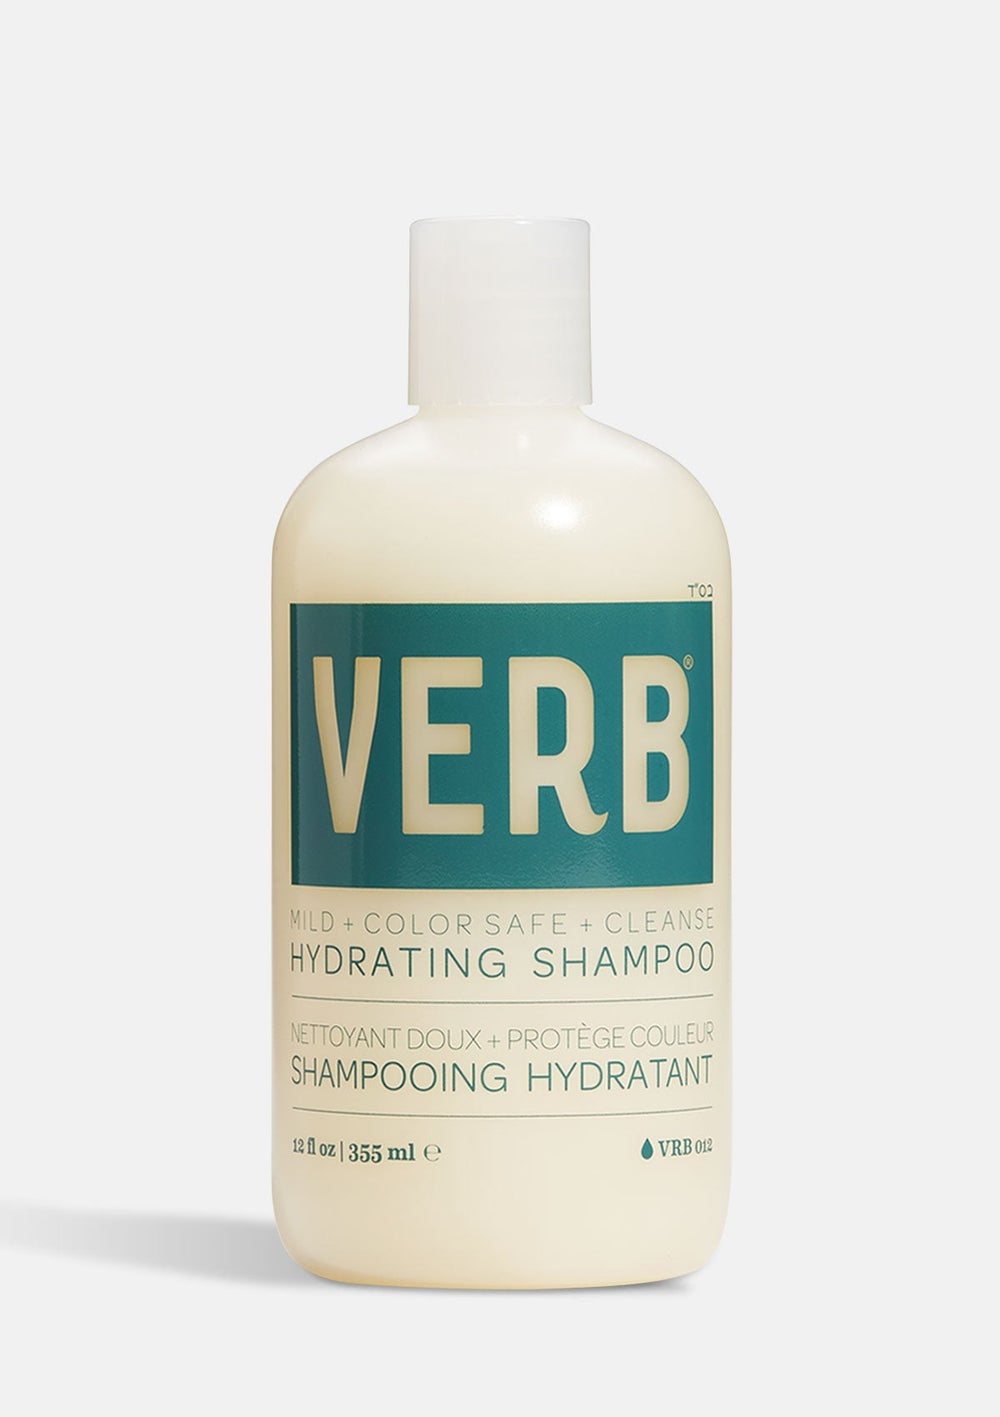 Verb - Hydrate Duo Cleanse + Soften + Hydrate |12 oz| - by Verb |ProCare Outlet|